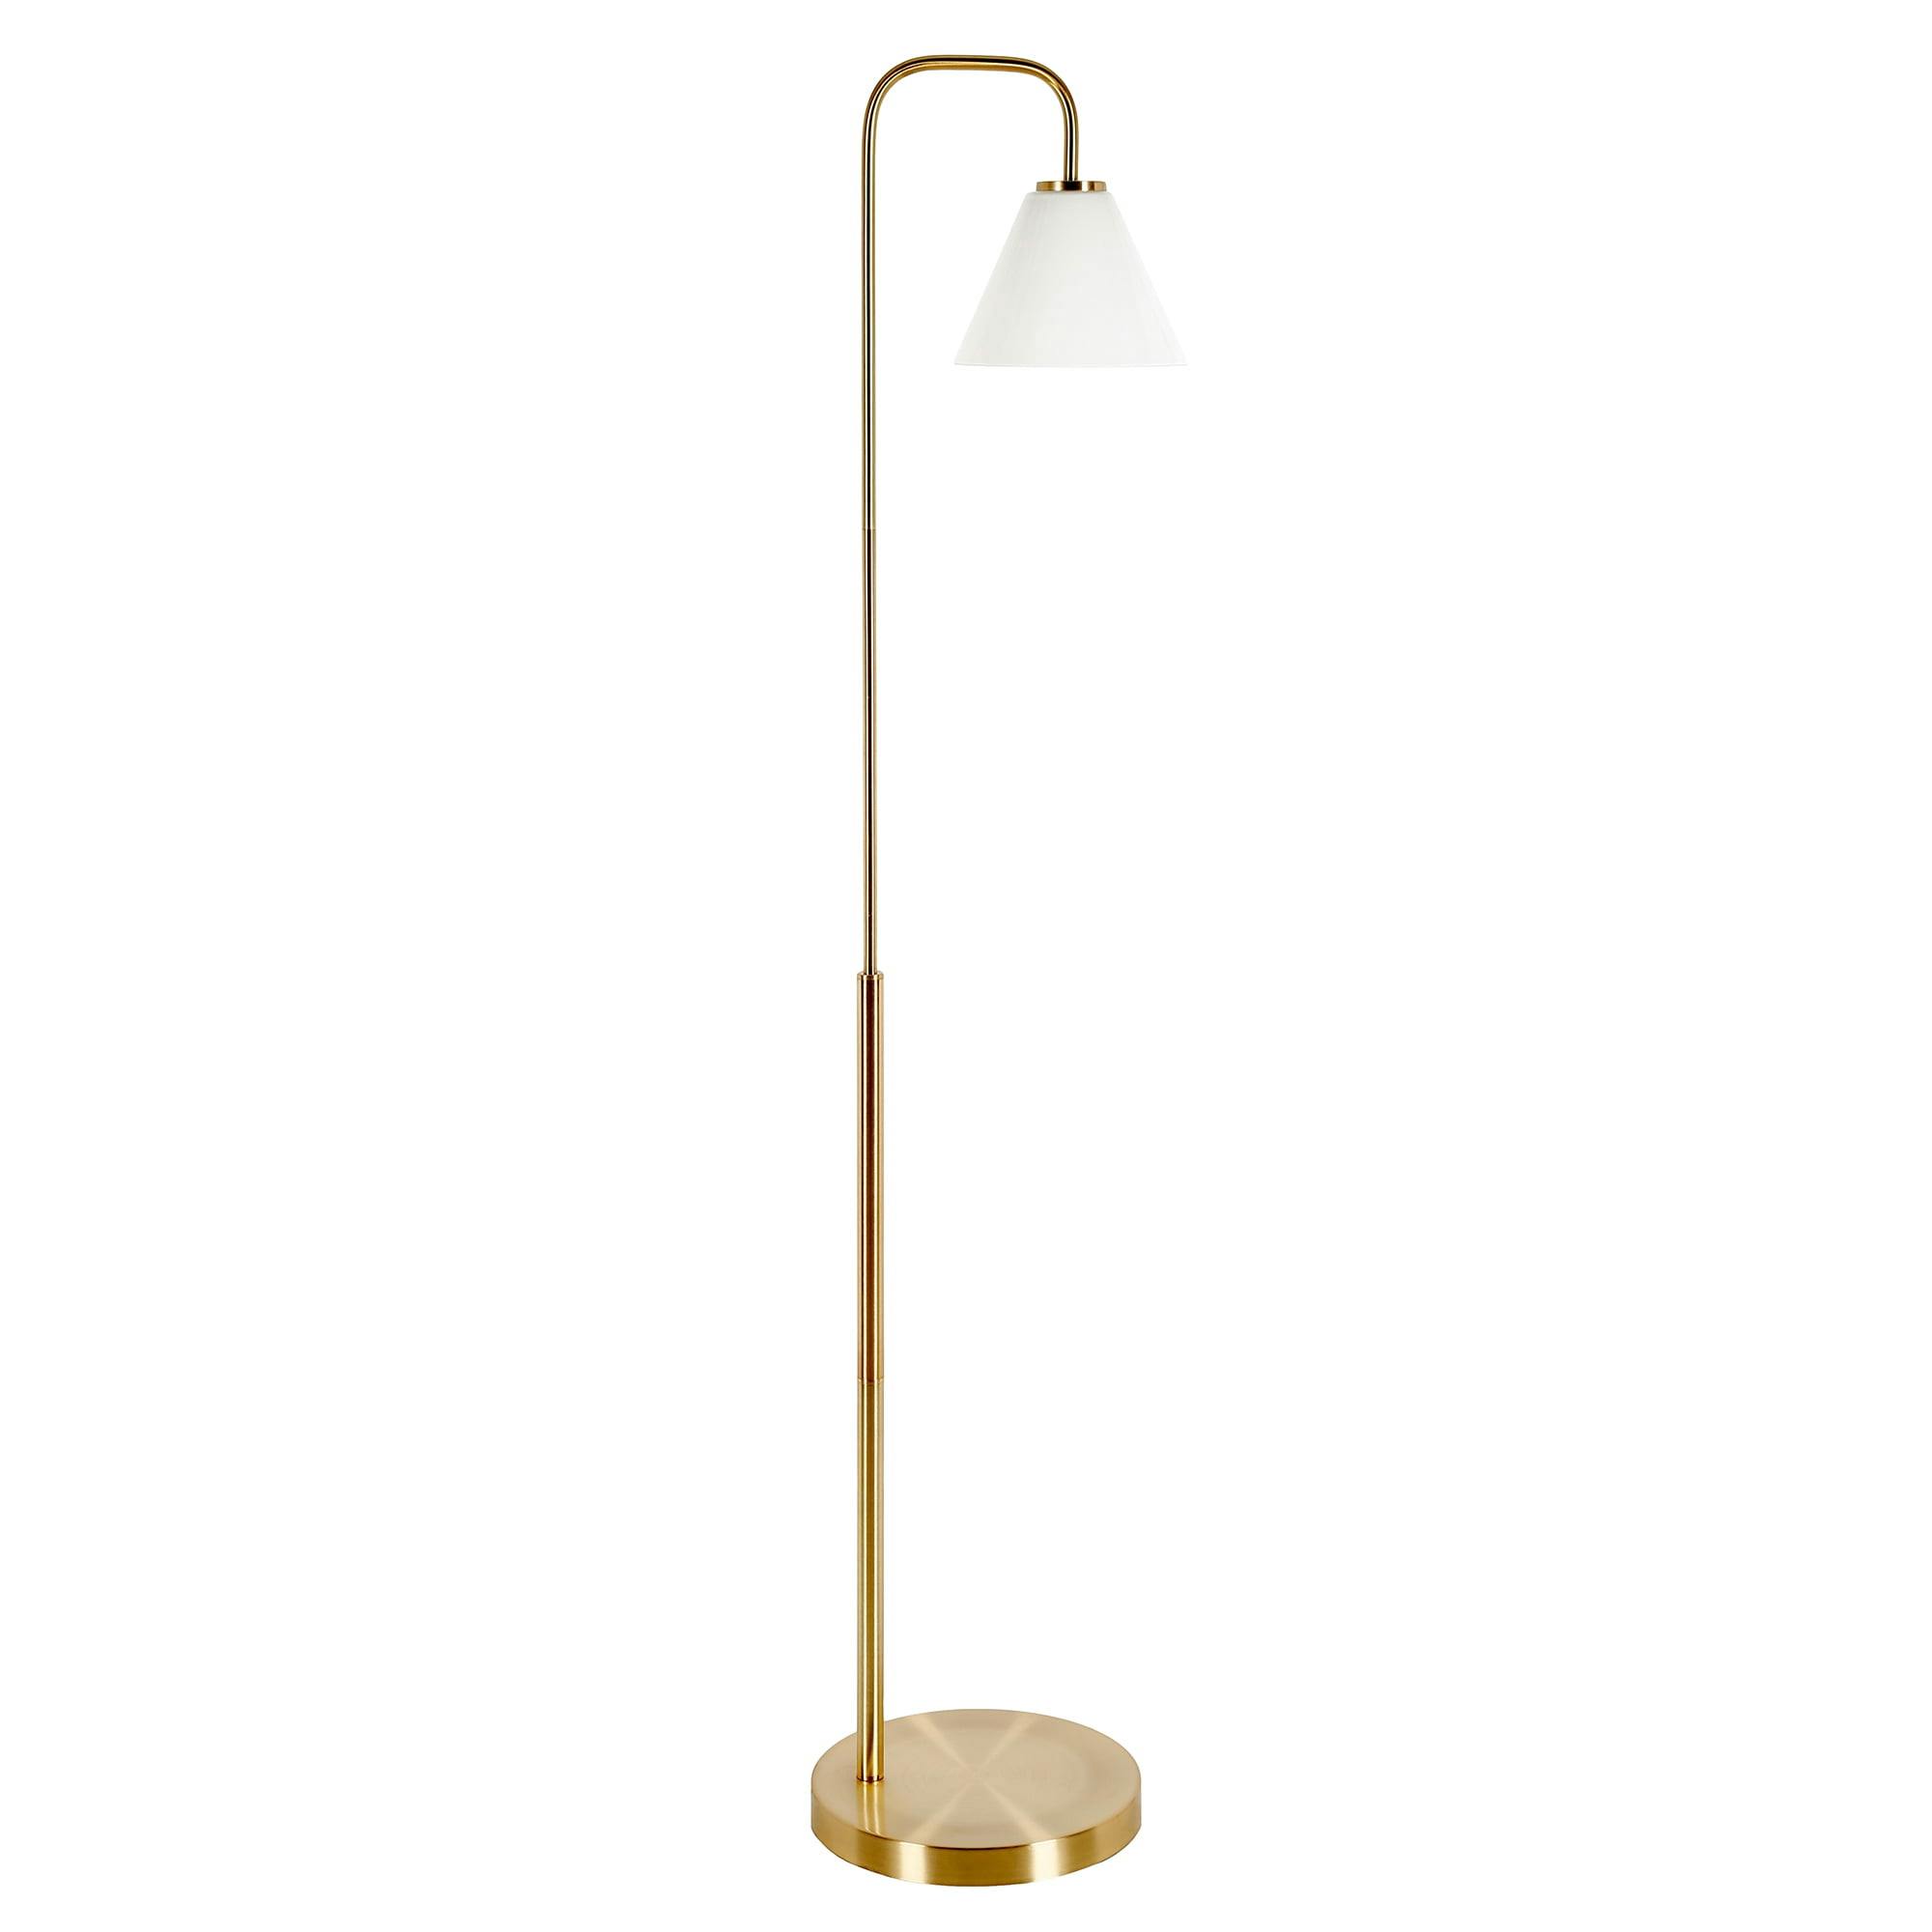 Elegant Arc Adjustable Floor Lamp with Brass Finish and White Milk Glass Shade